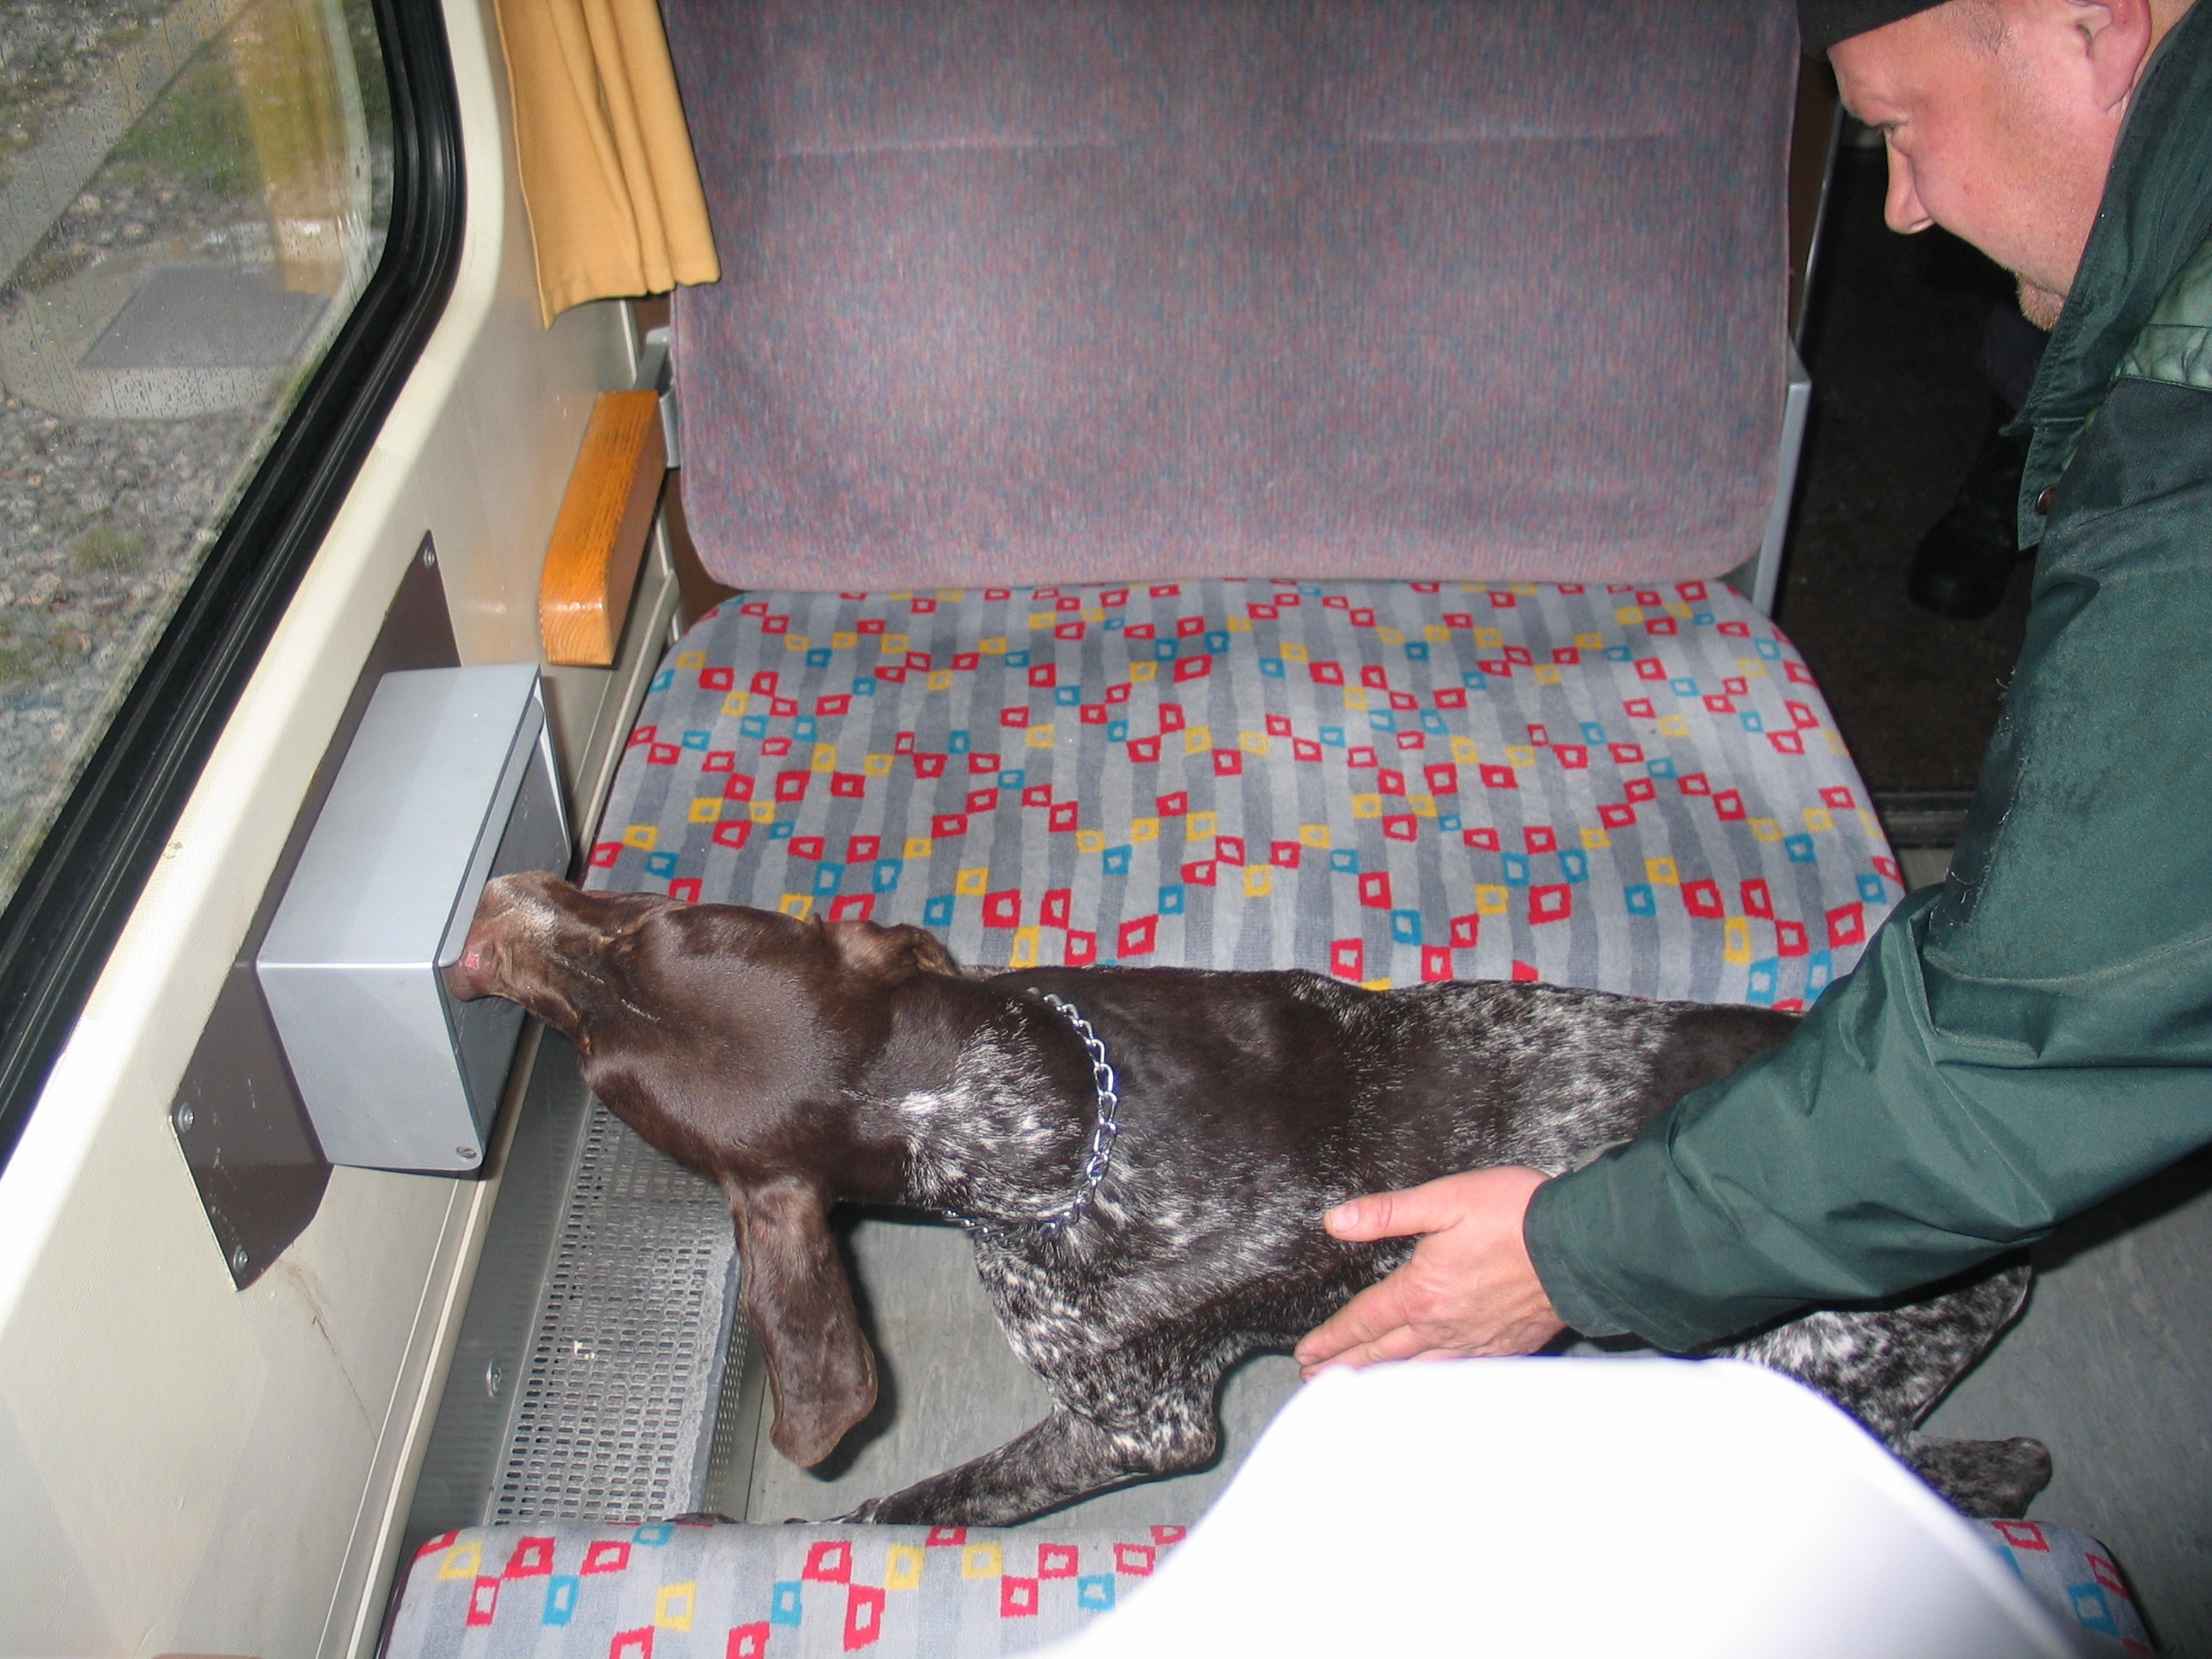 Officer with dog practice drill on train